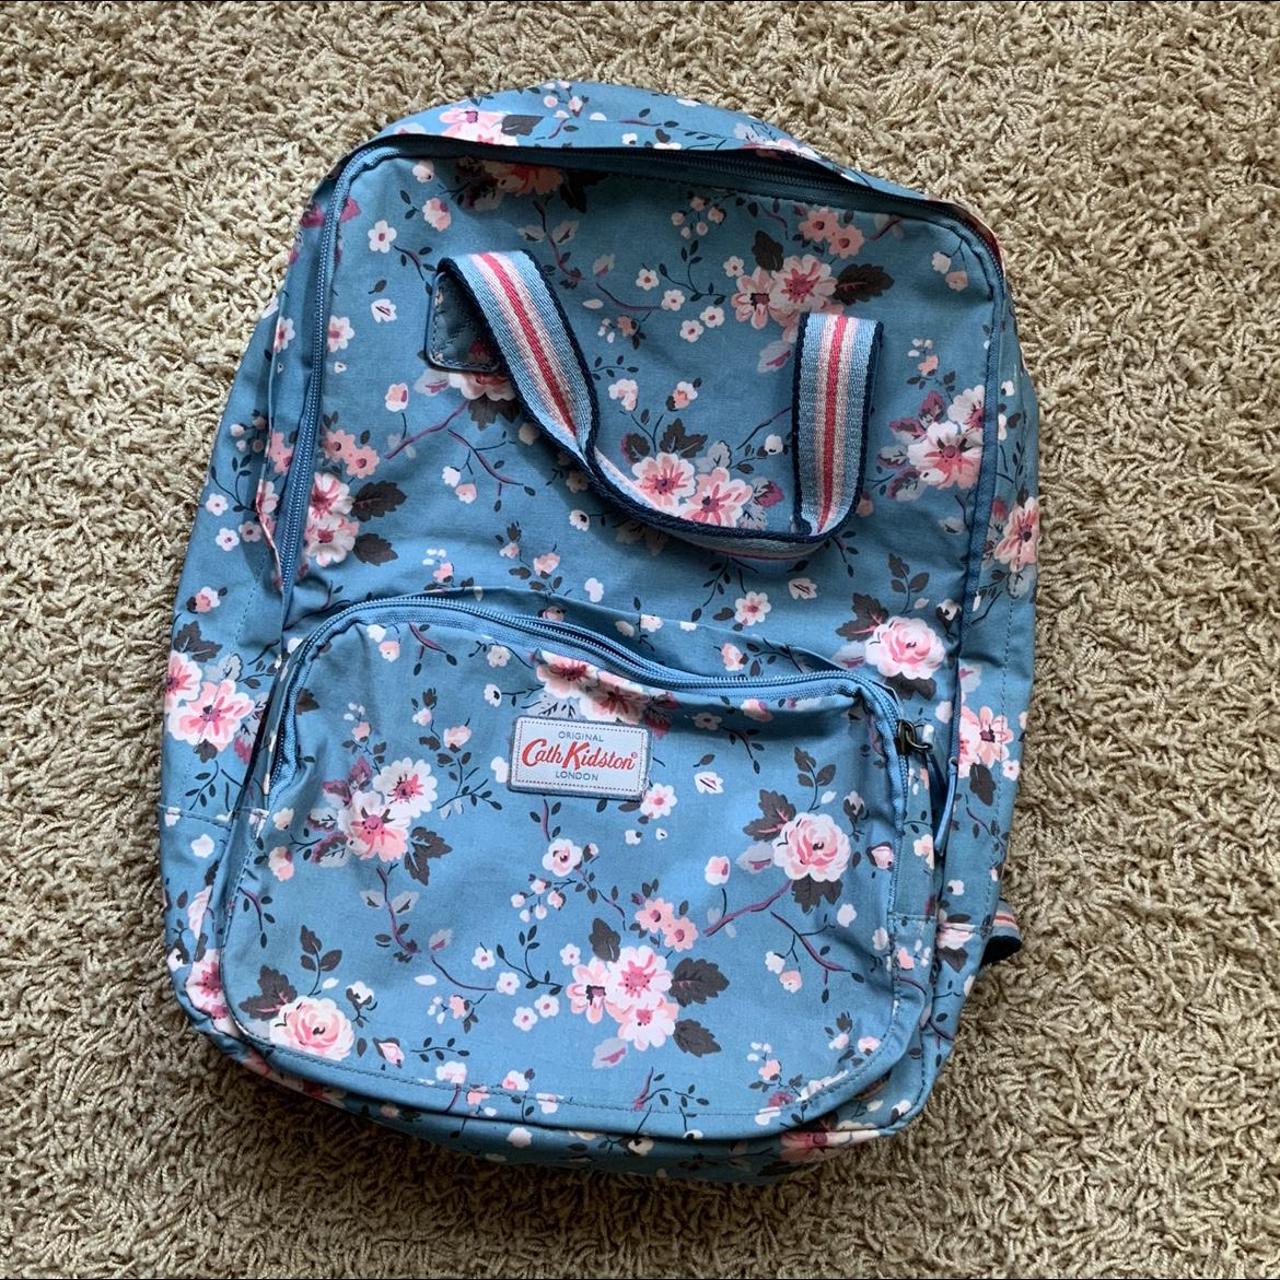 Cath Kidston Women's Blue and Pink Bag